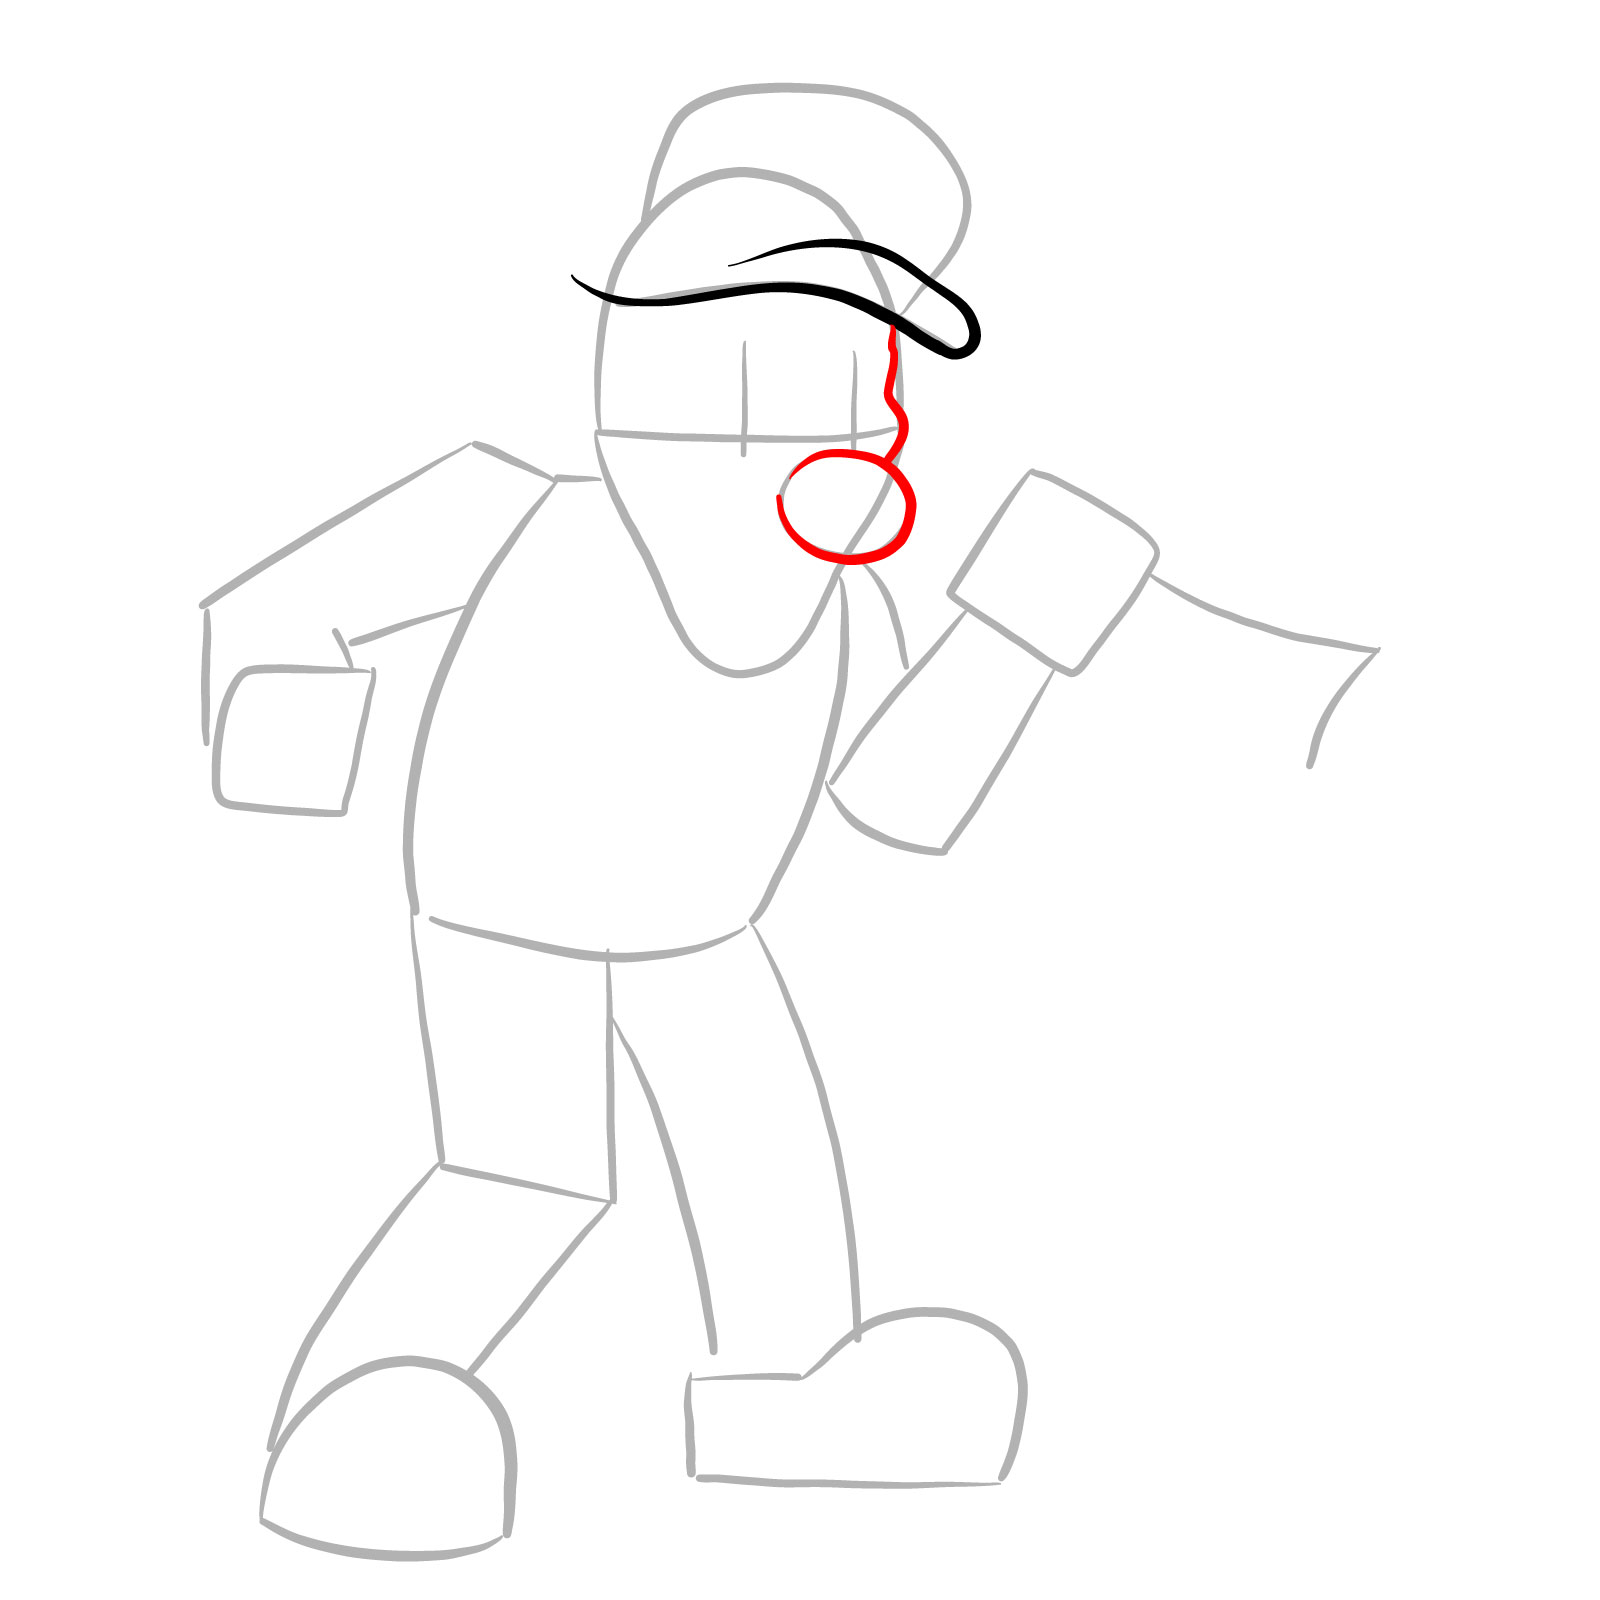 how to draw mario exe